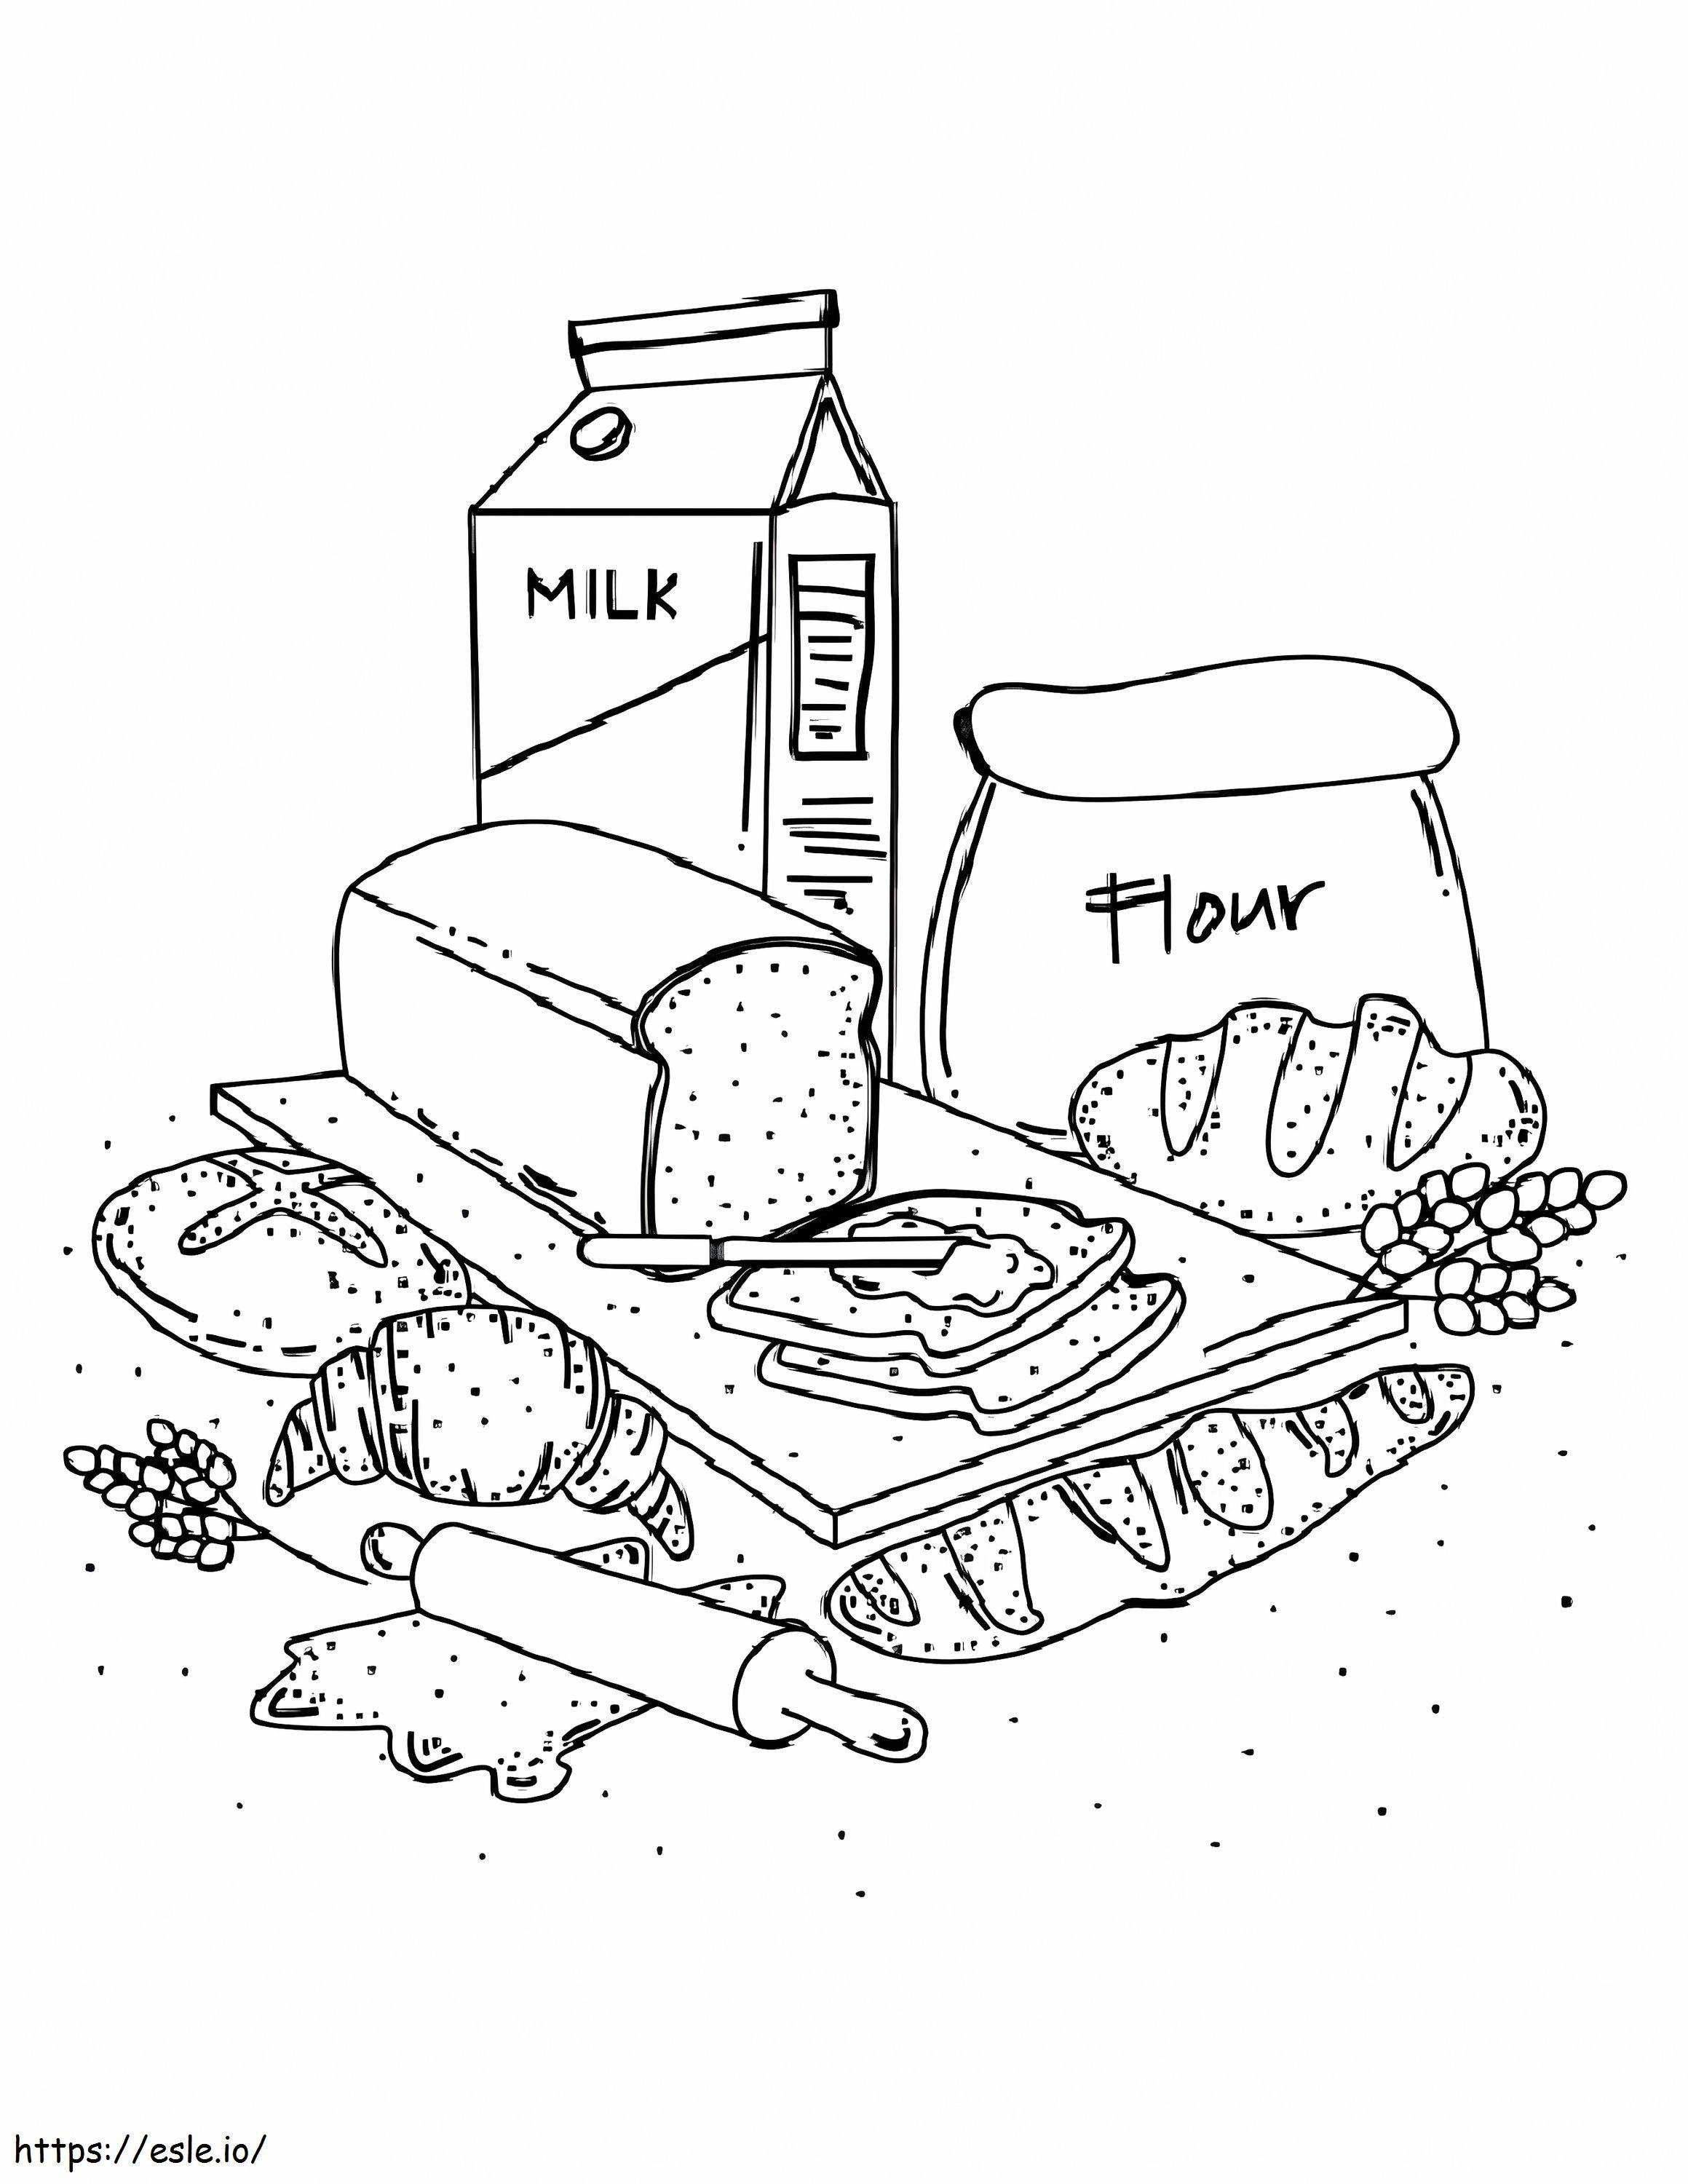 Bread Ingredients coloring page